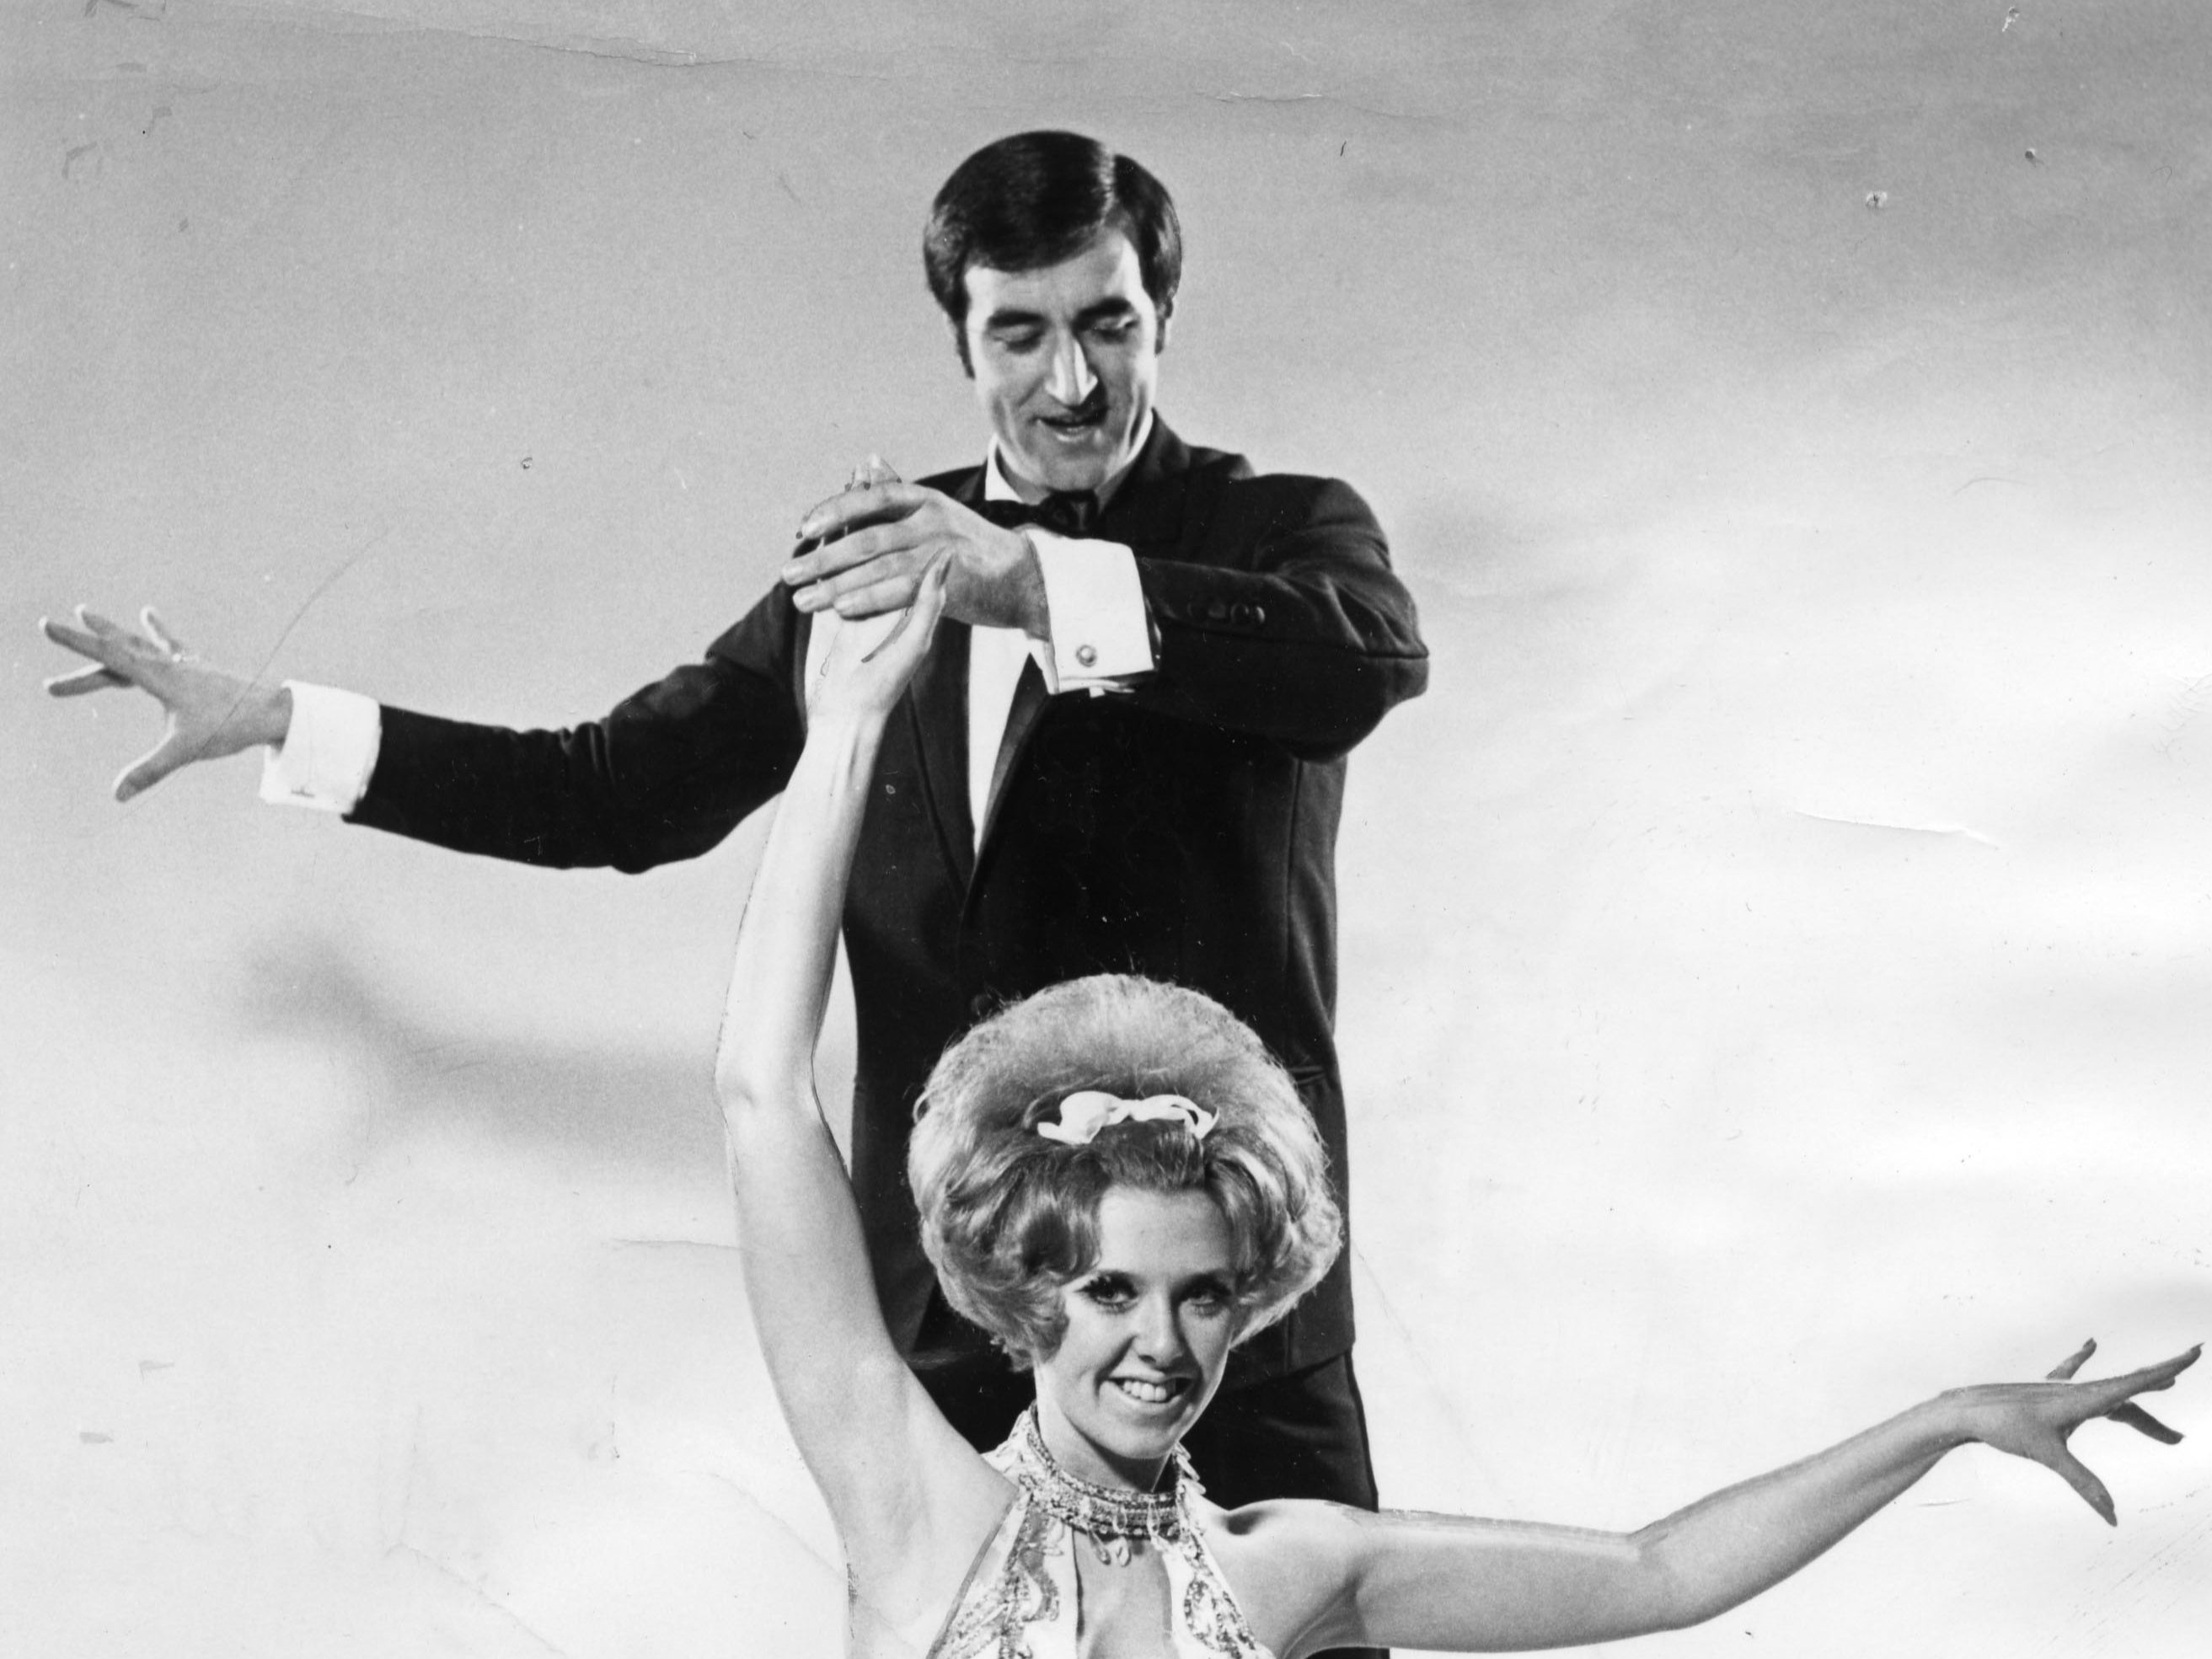 A young Len Goodman with his former dance partner, ex-wife Cherry Kingston